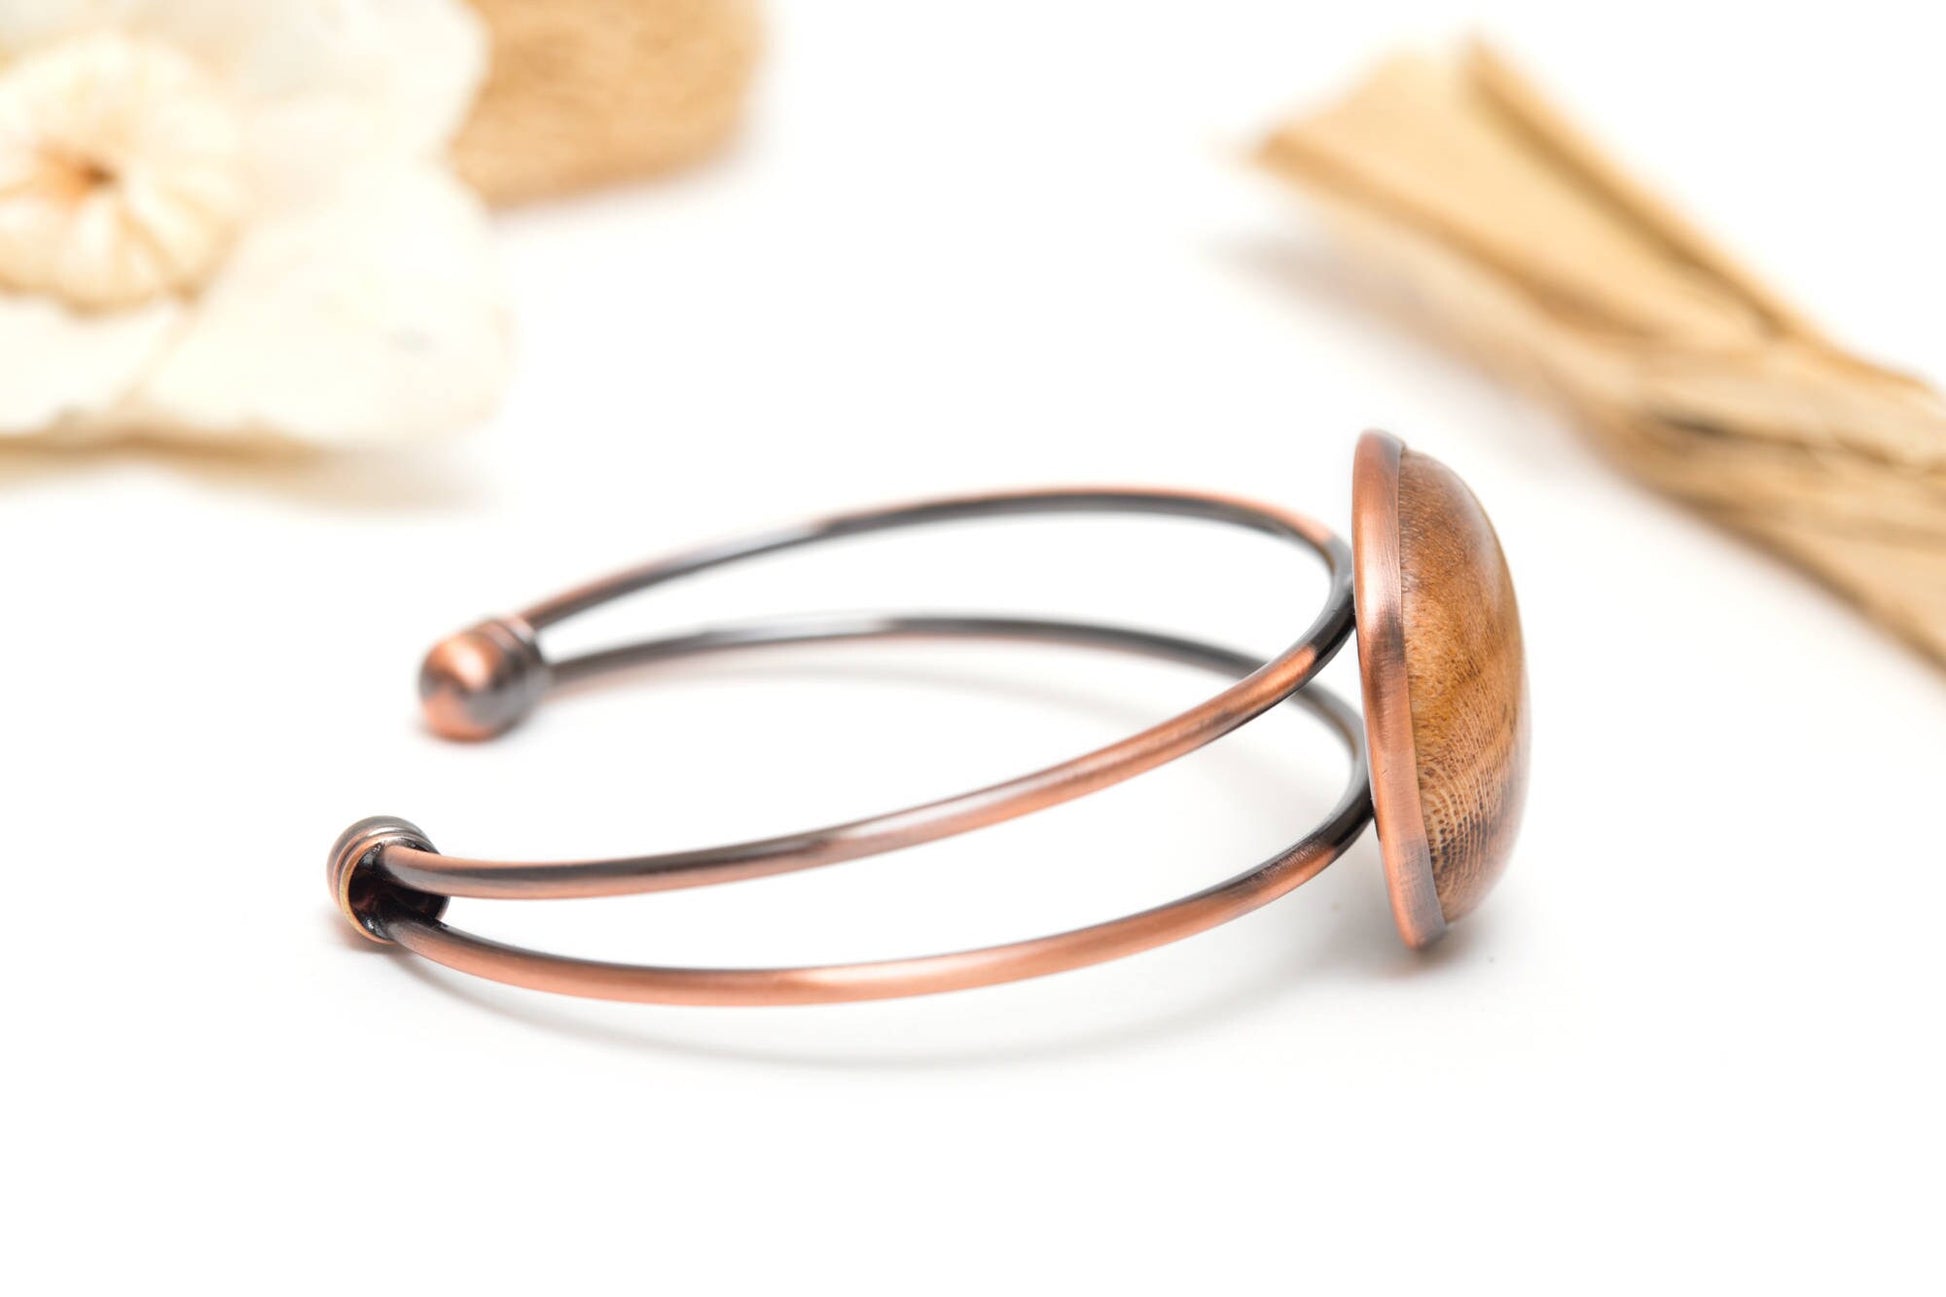 Copper Grapevine Bangle Bracelet - Celetto - Made from retired Cabernet grapevines 100% Recycled!